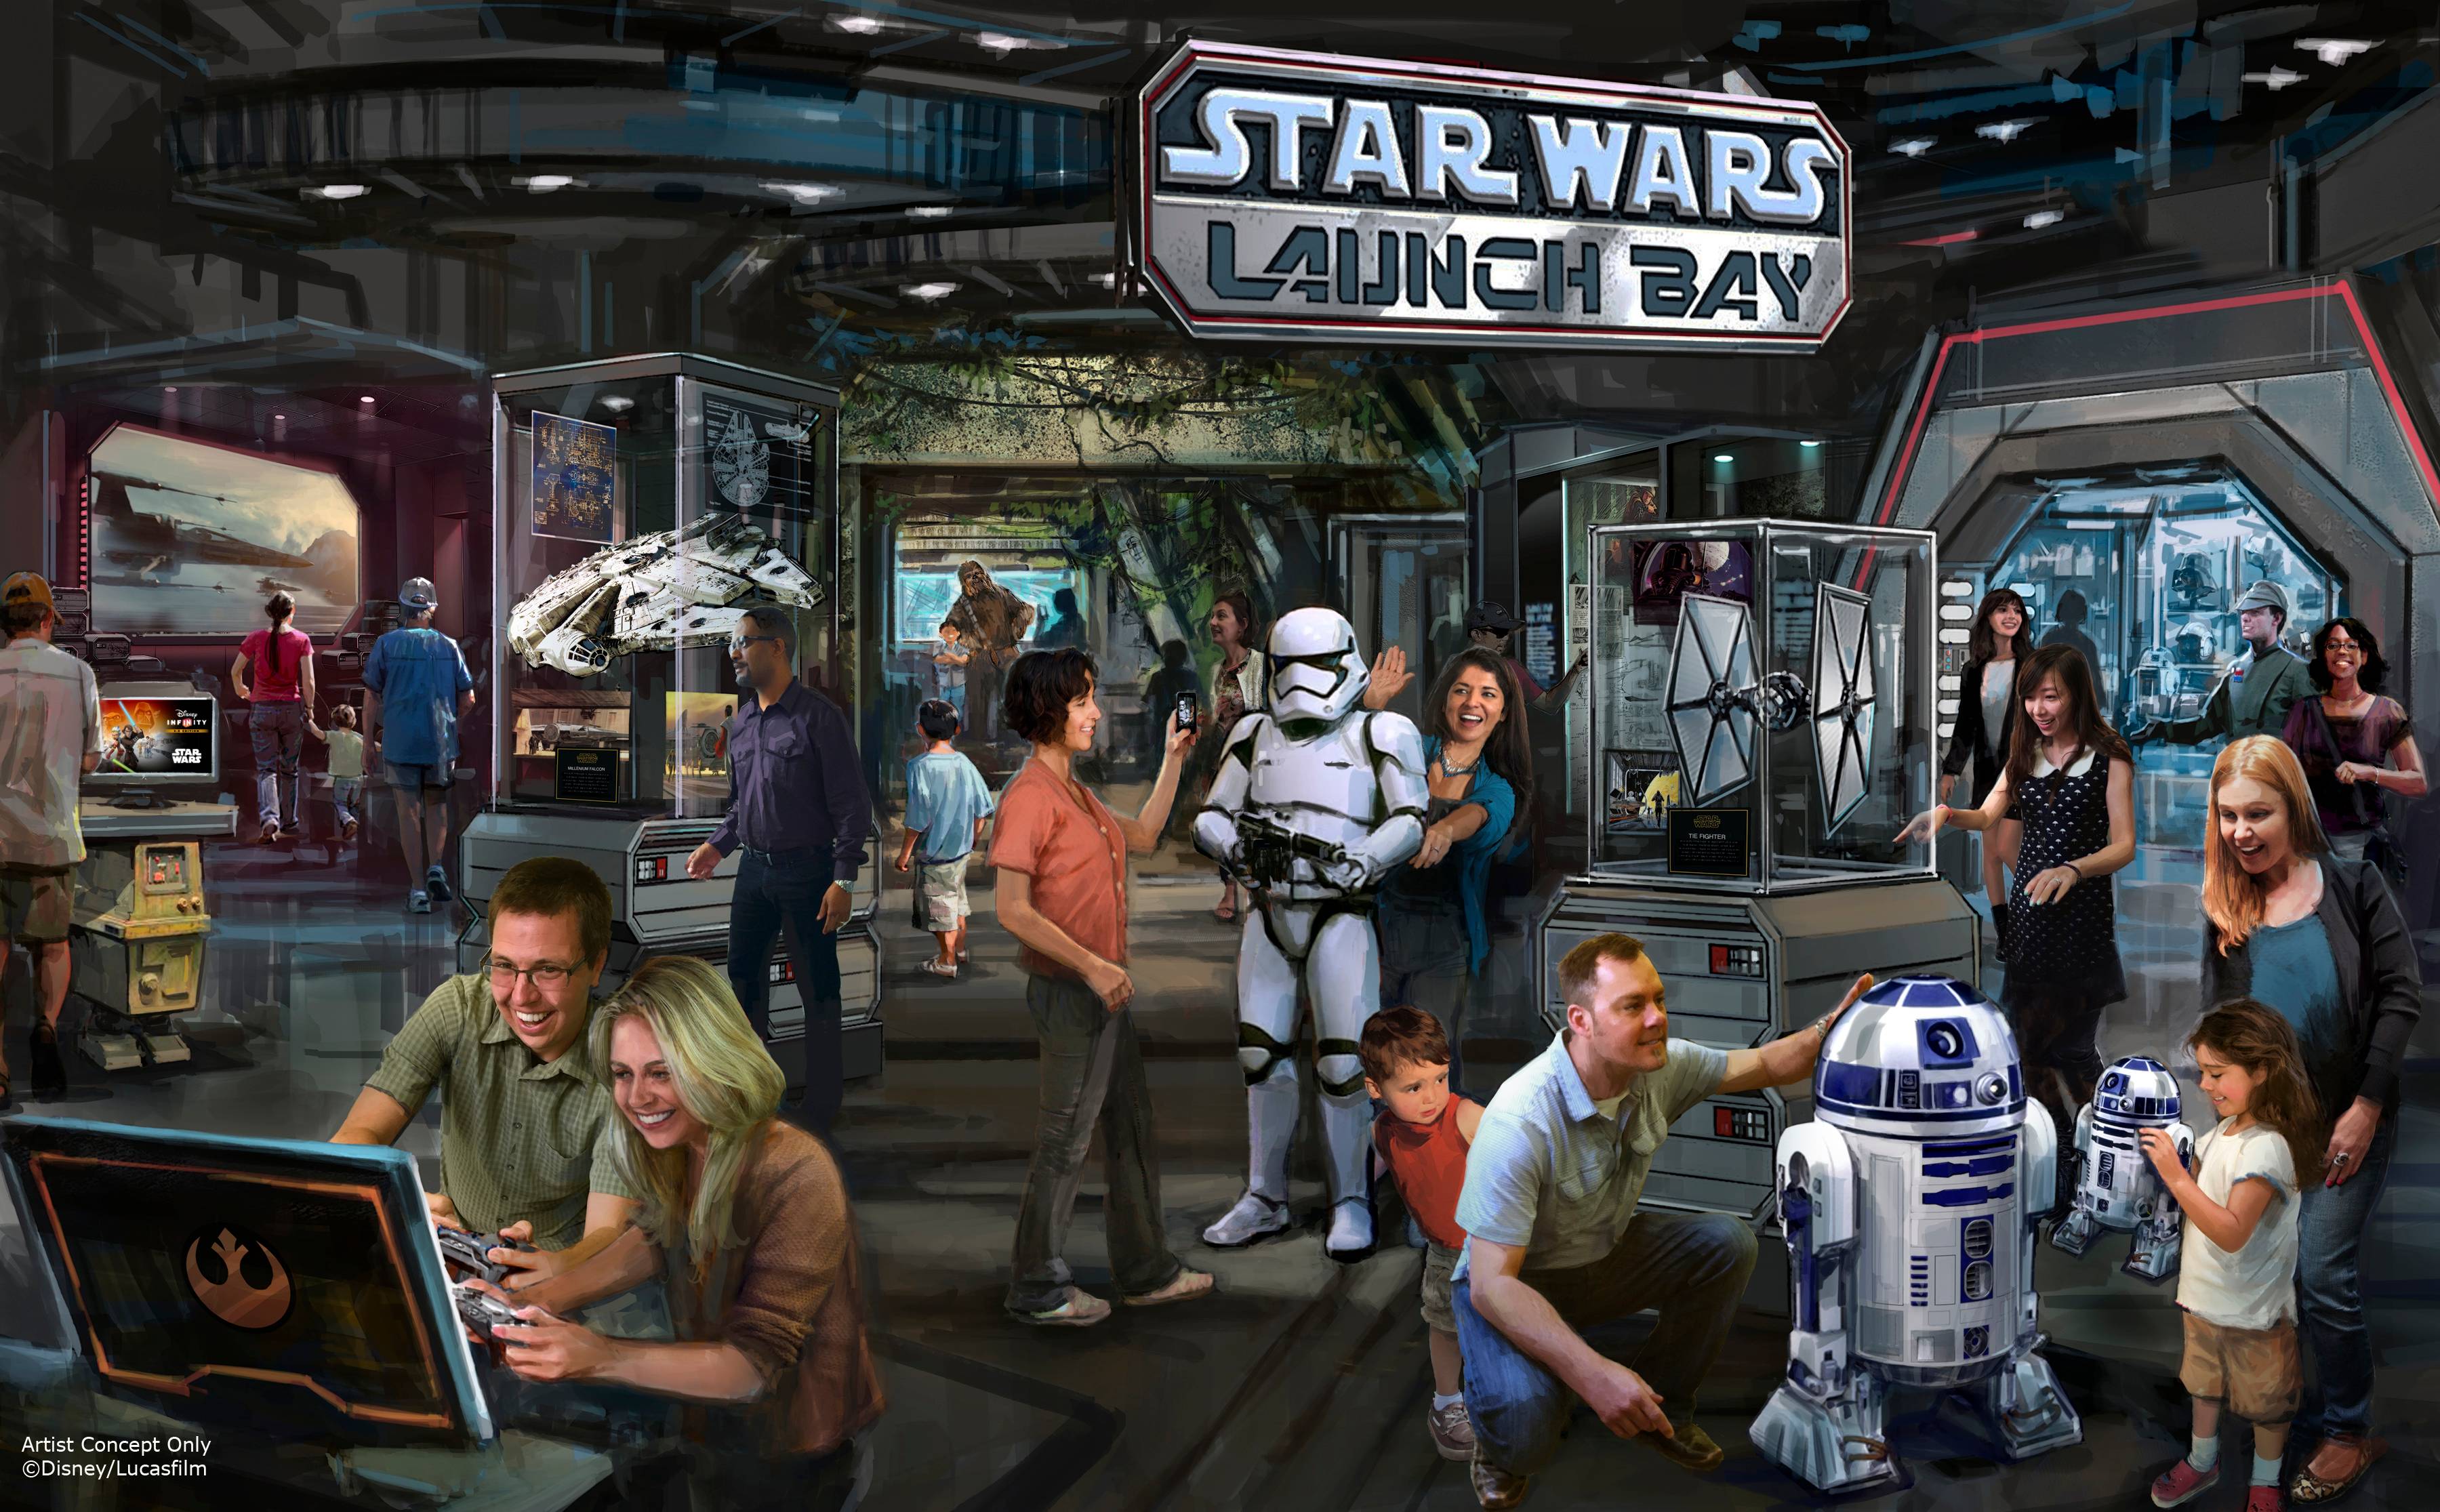 Full details for Star Wars Launch Bay at Disney's Hollywood Studios